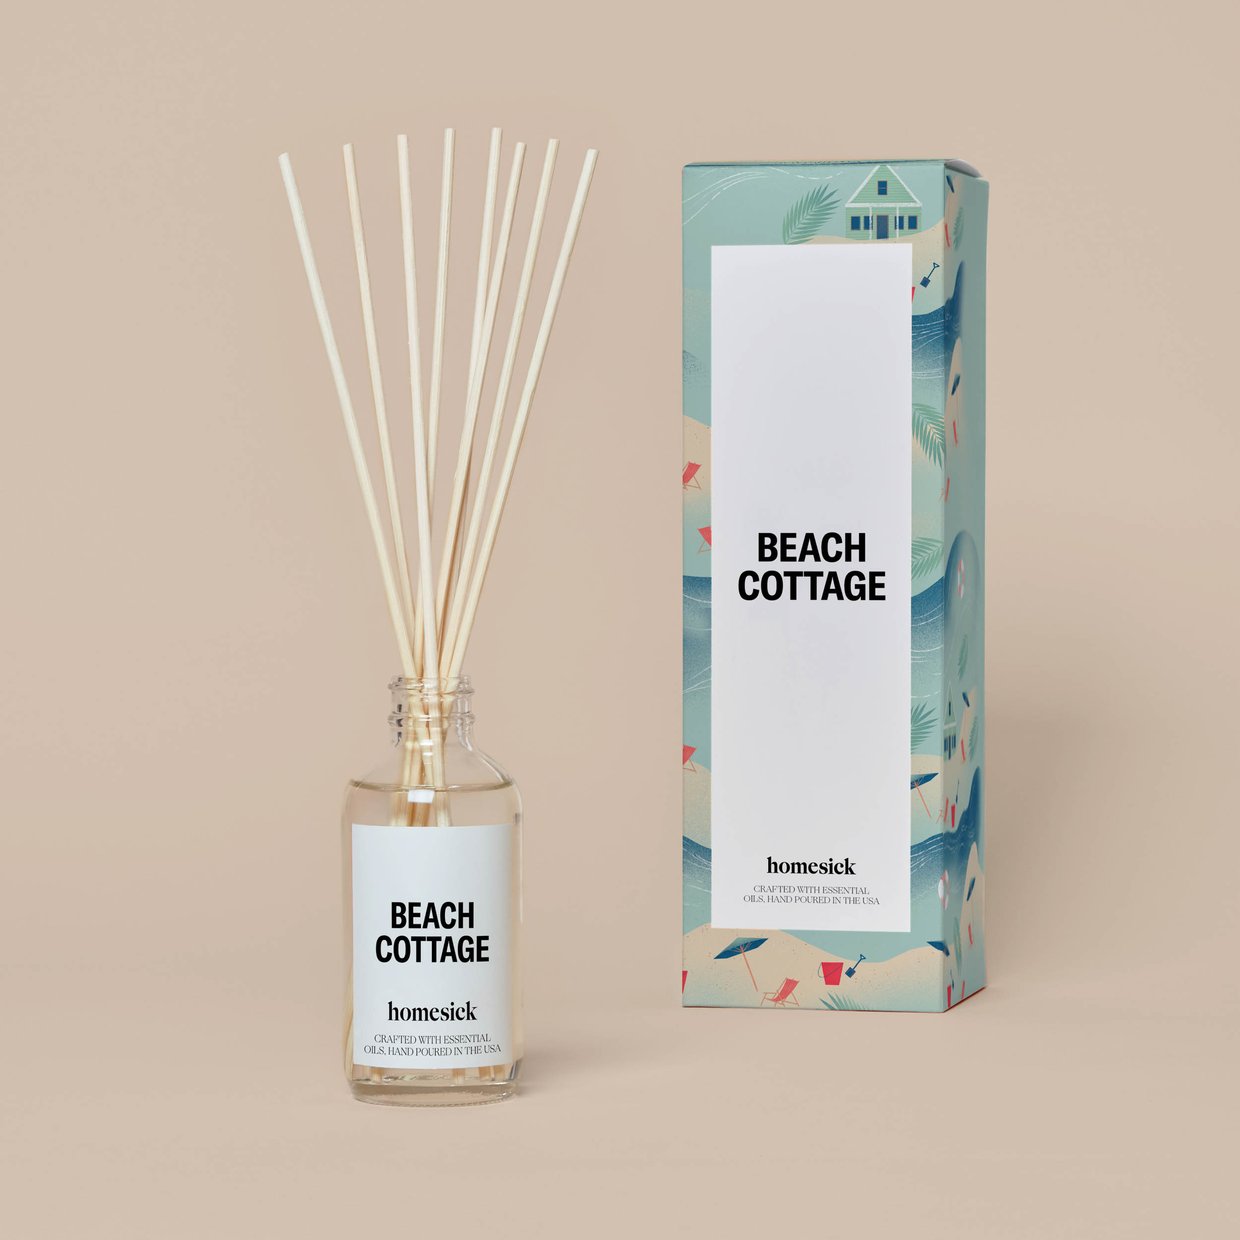 Homesick Homesick Beach Cottage Reed Diffuser available at The Good Life Boutique